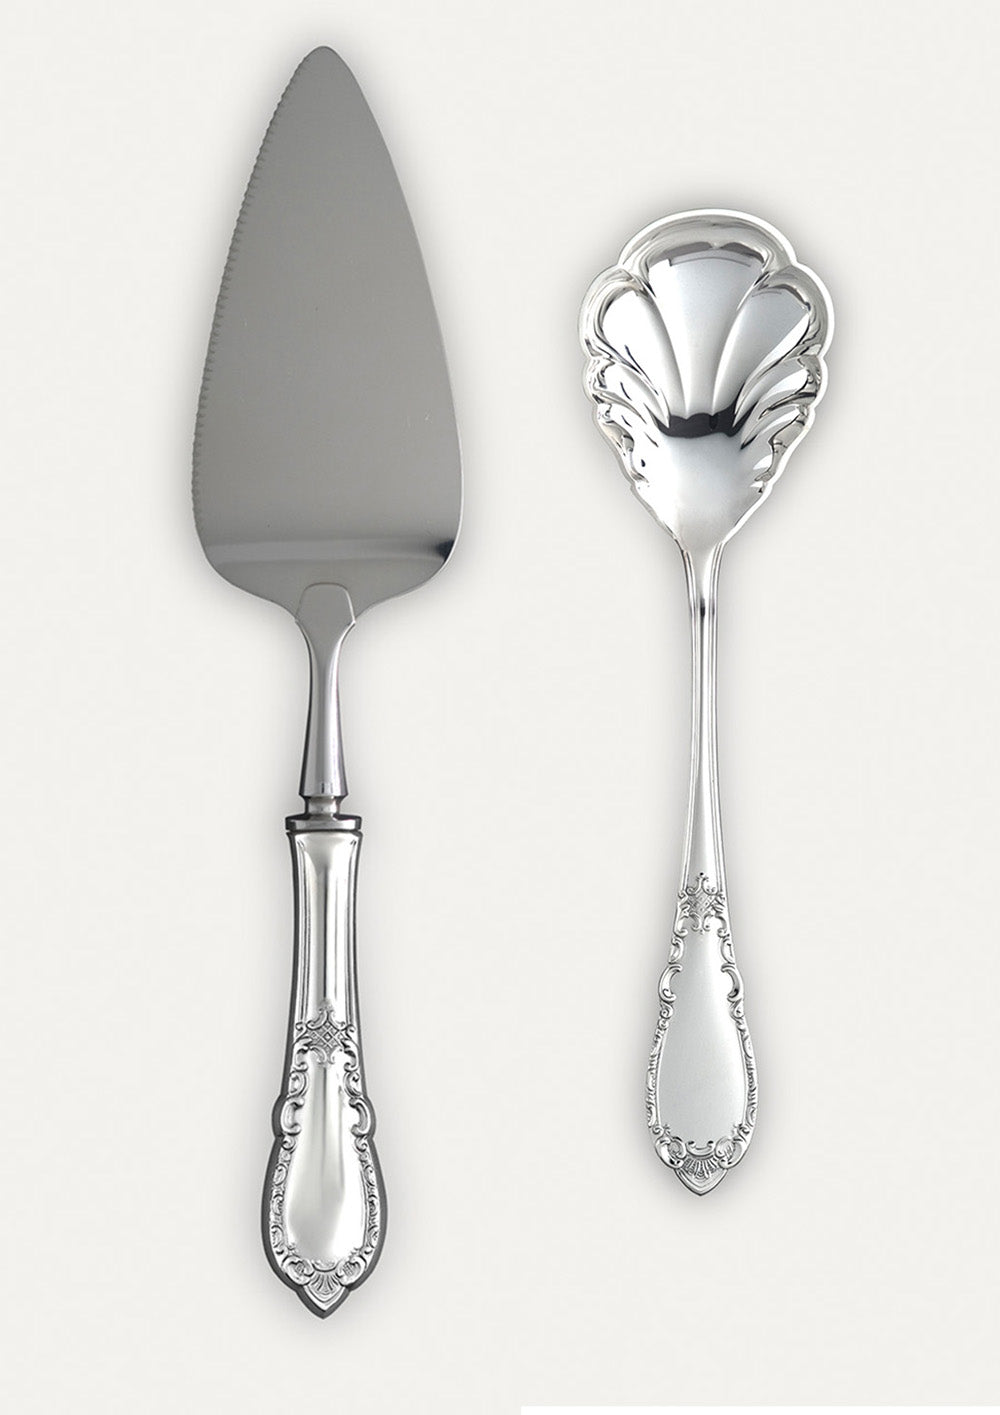 Noble pie spatula and jam spoon